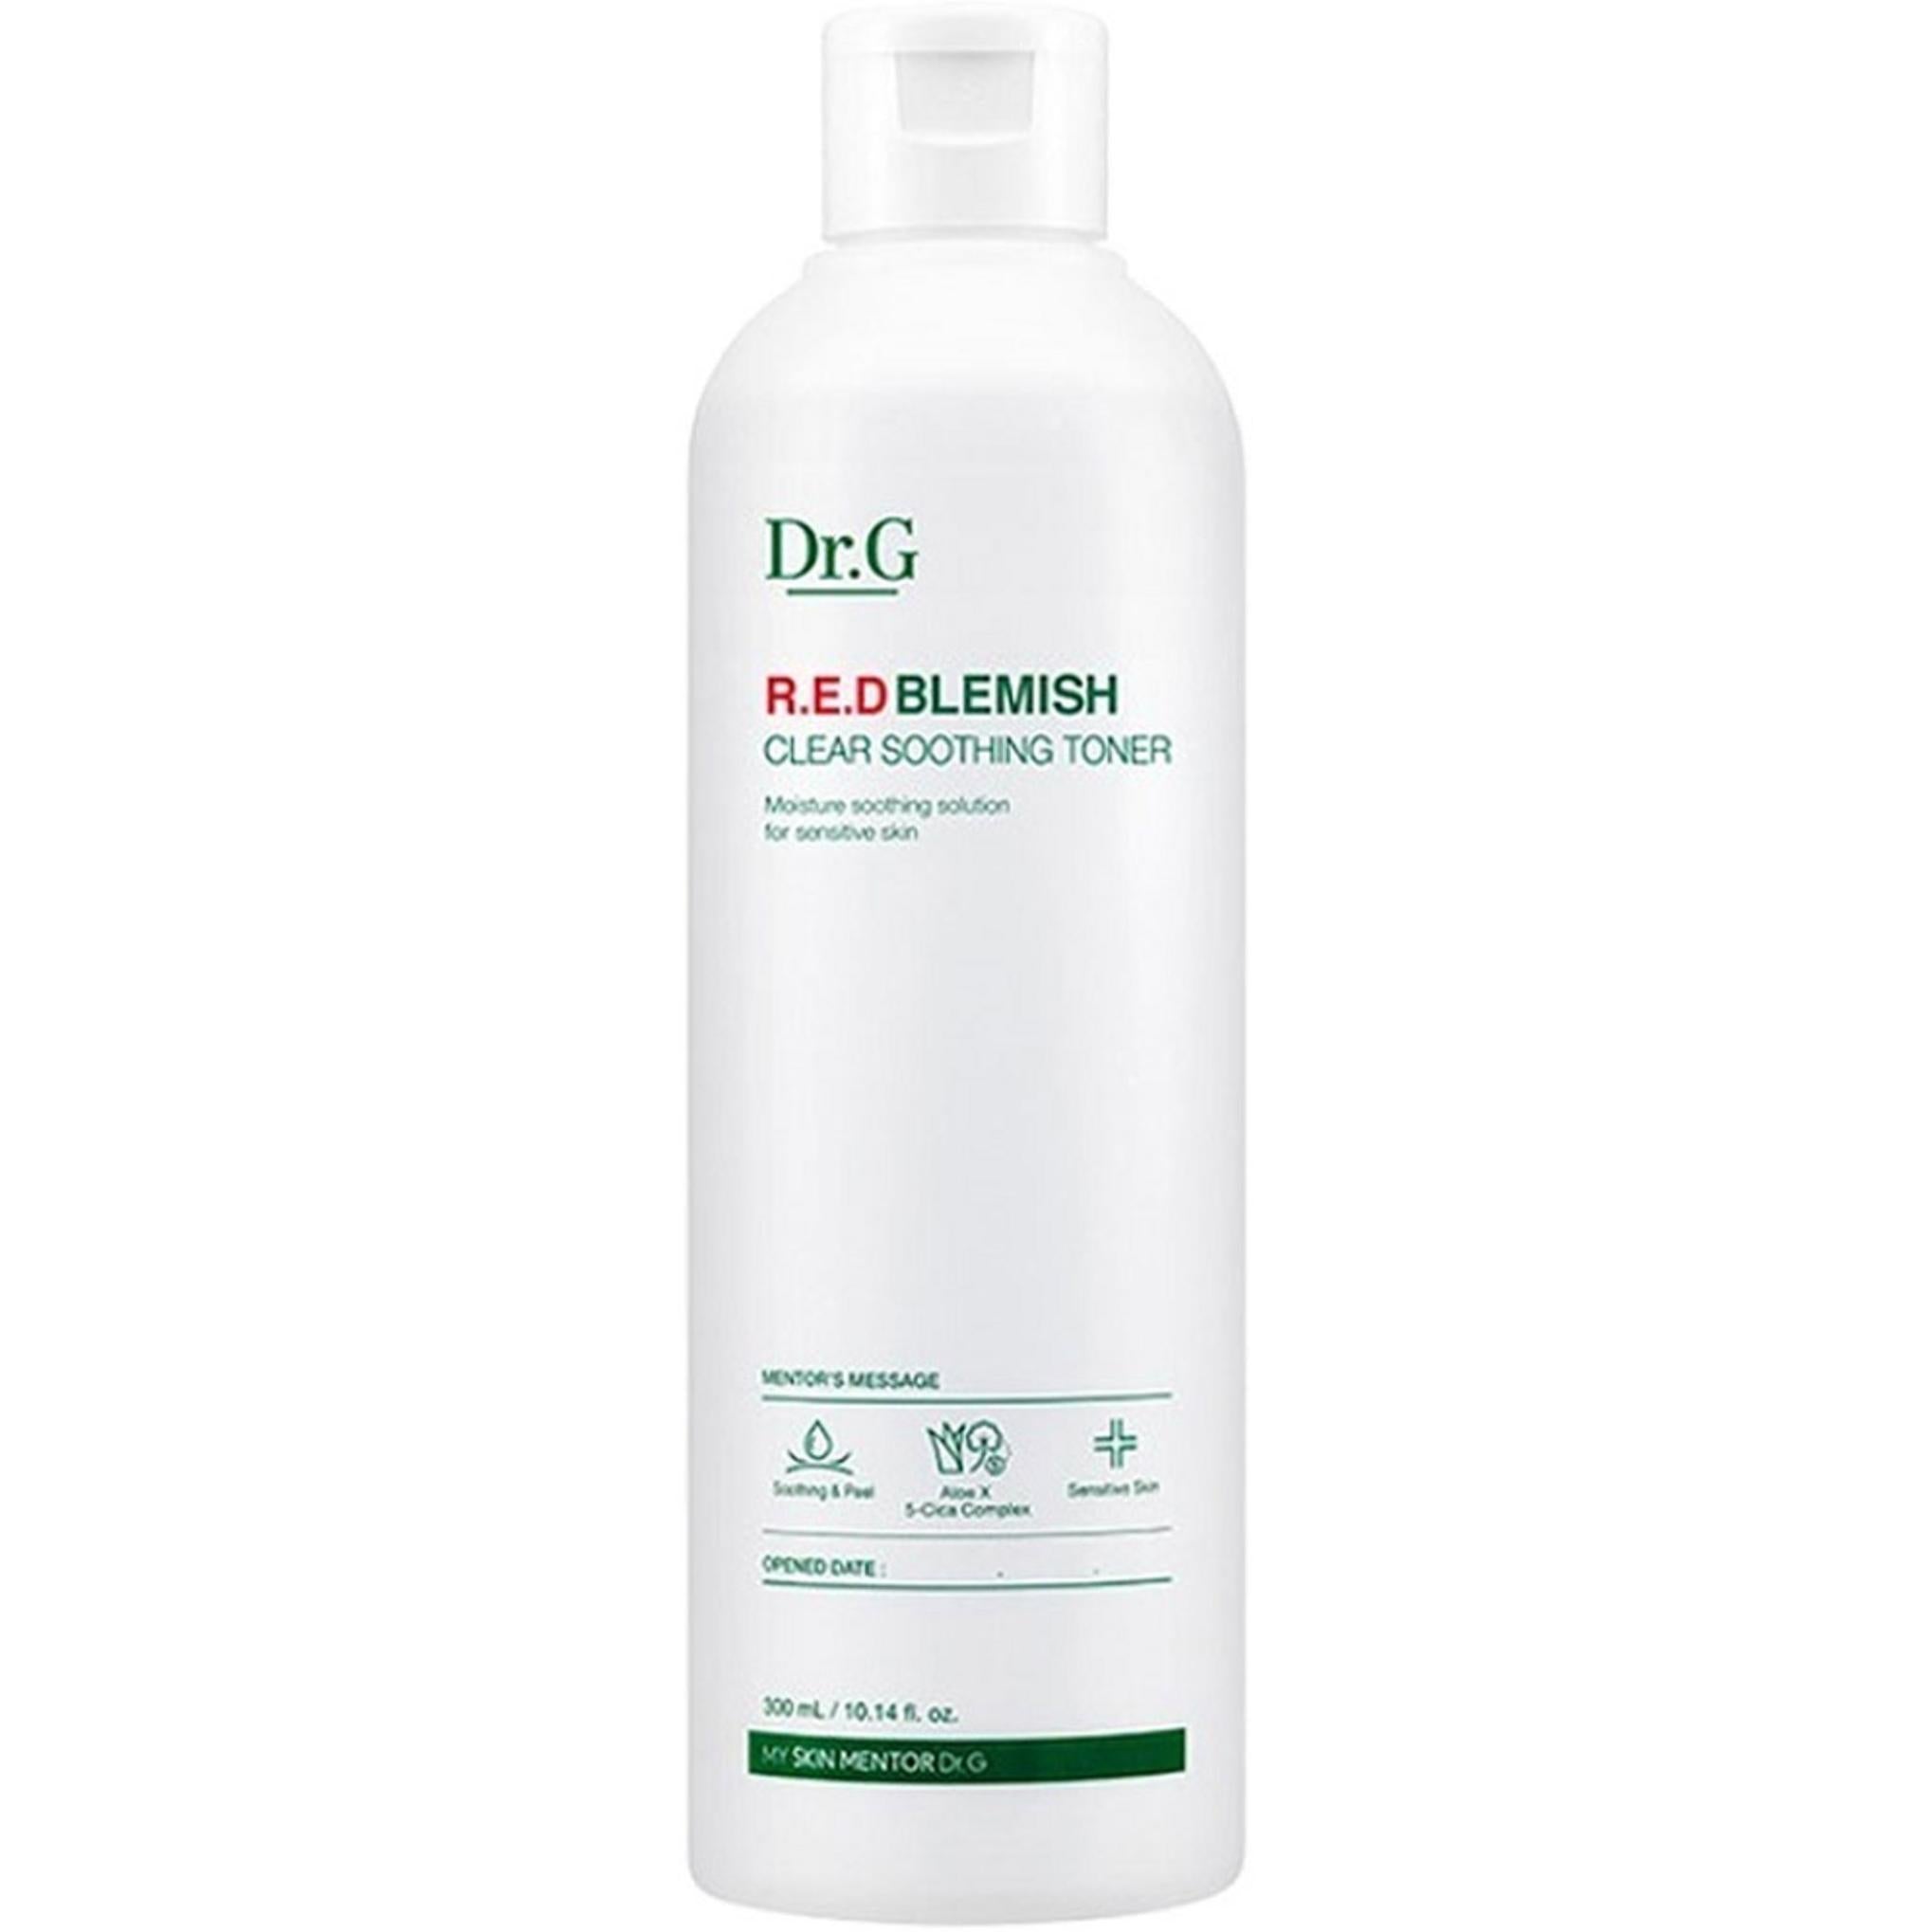 Dr.G Red Blemish Clear Soothing Toner